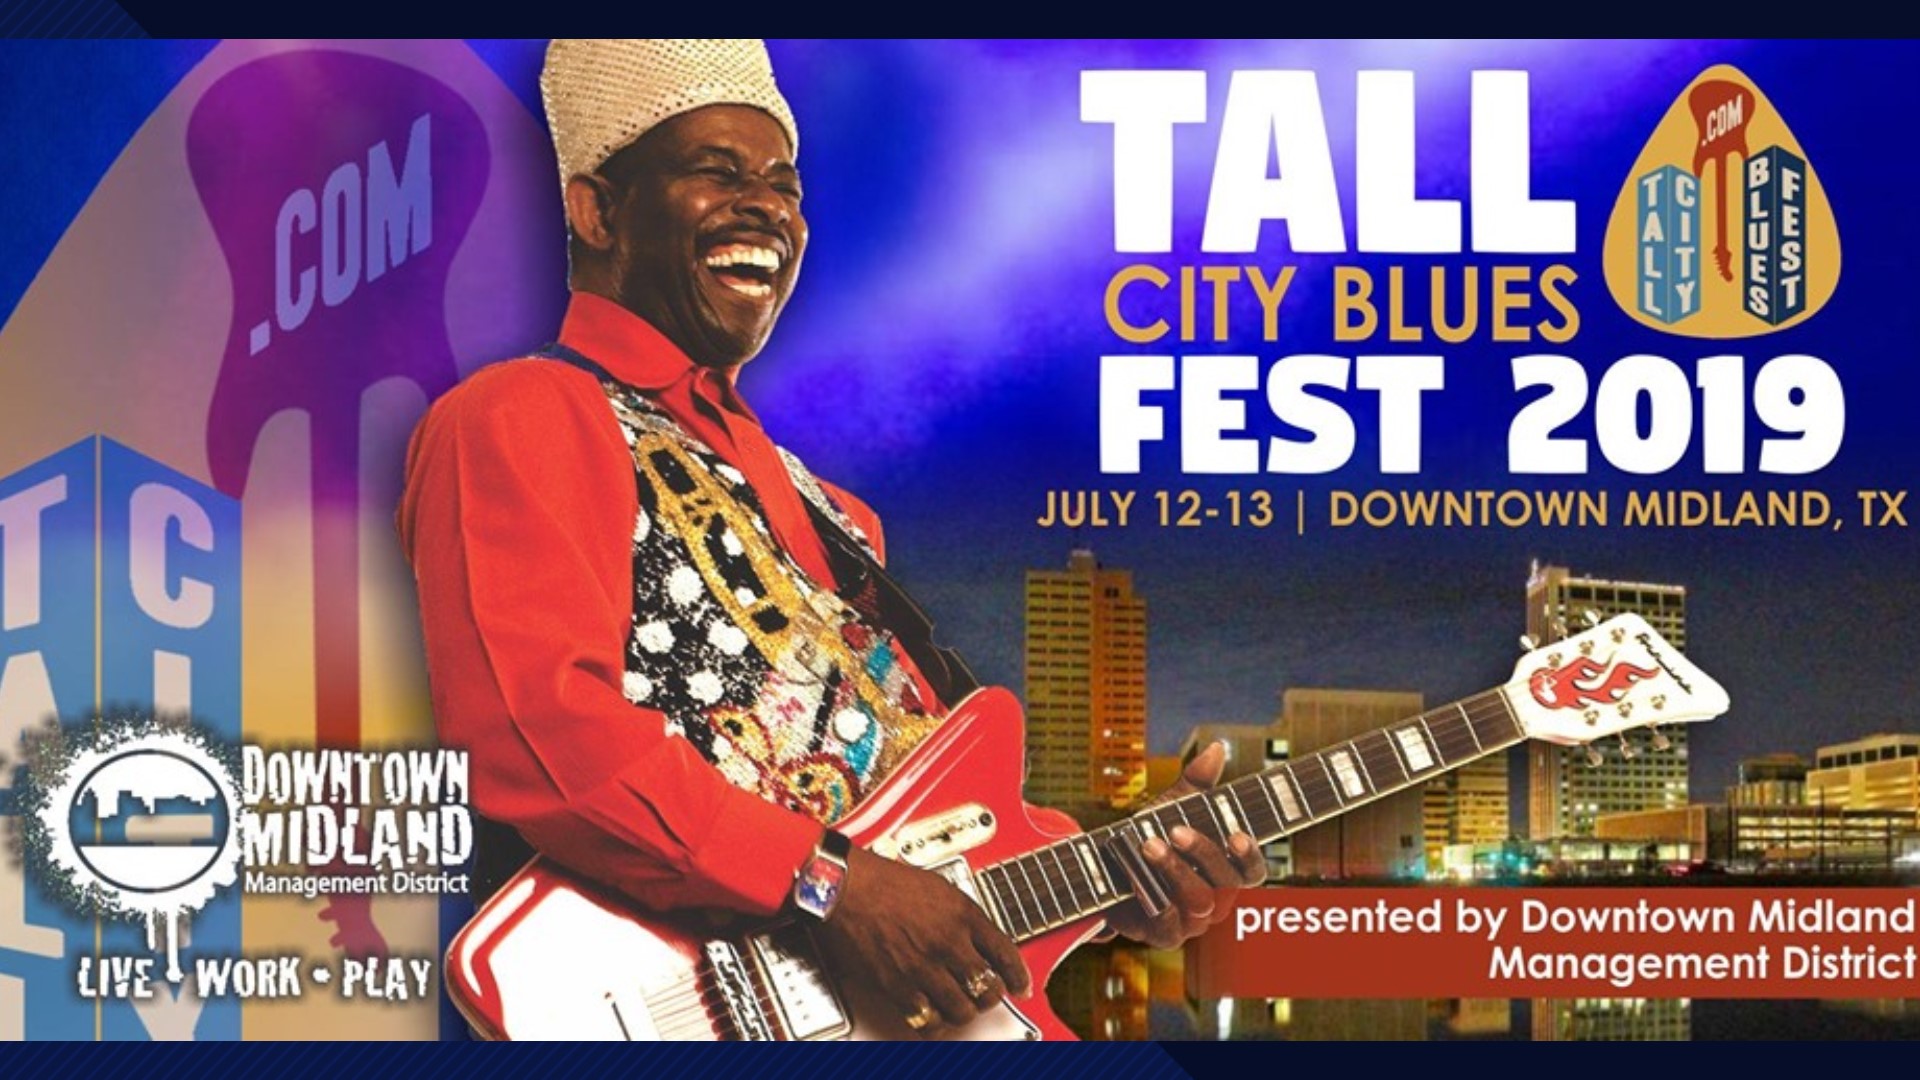 The Tall City Blues Fest is returning to Midland with a lineup of 22 performers.